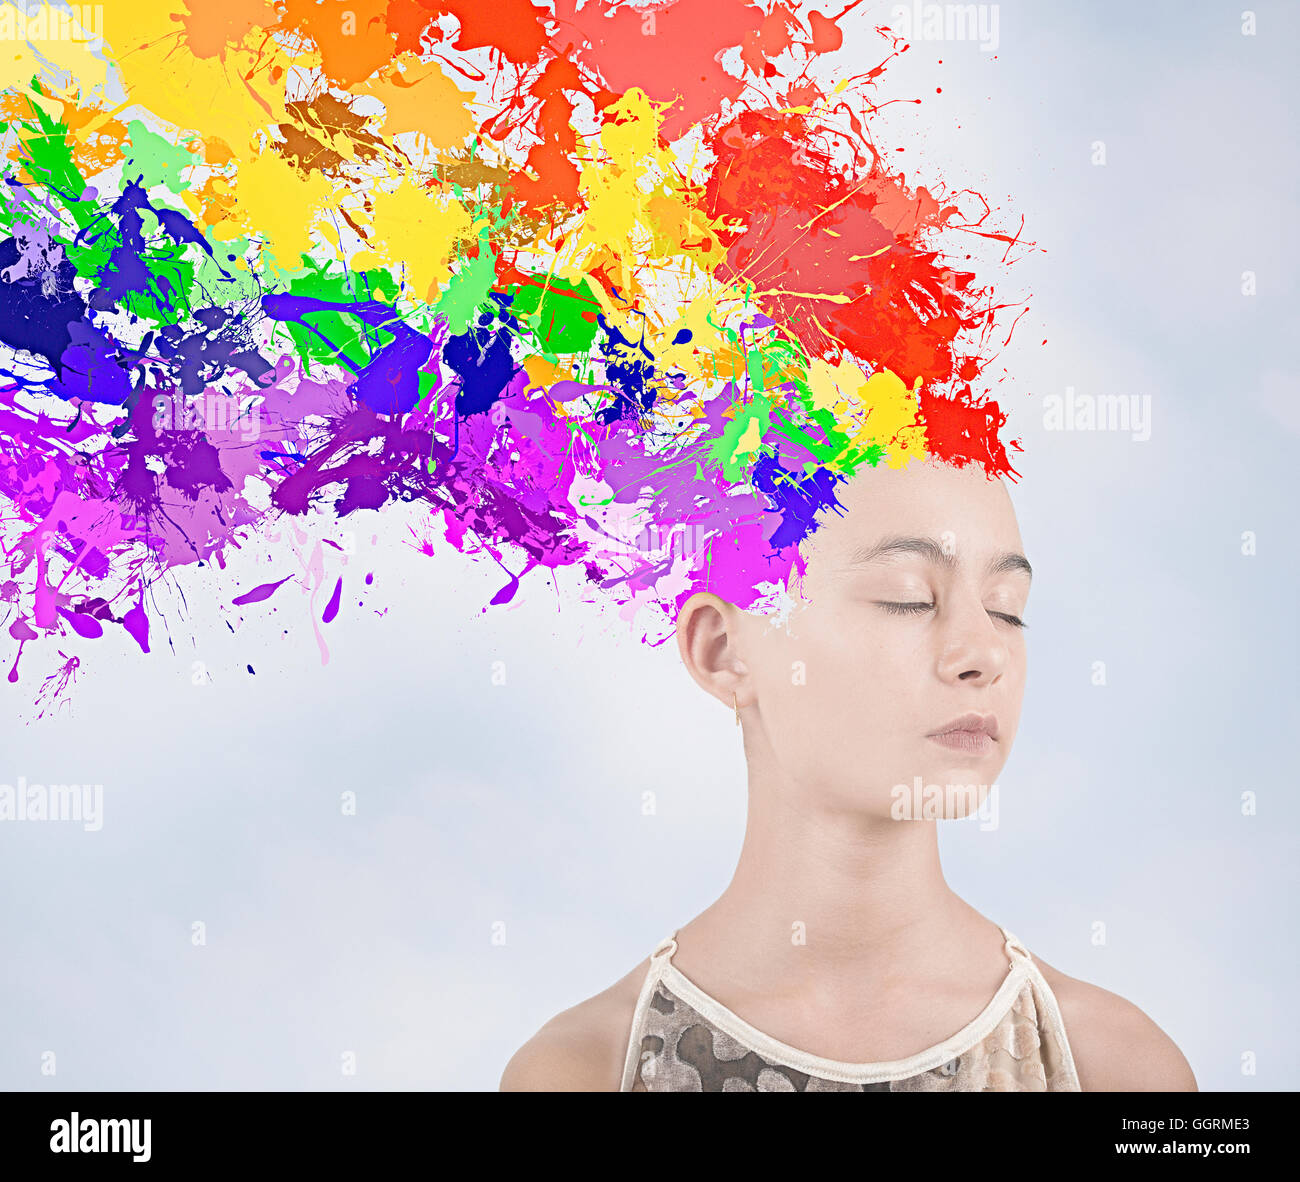 Paint splatter exploding from head of Mixed Race girl Stock Photo